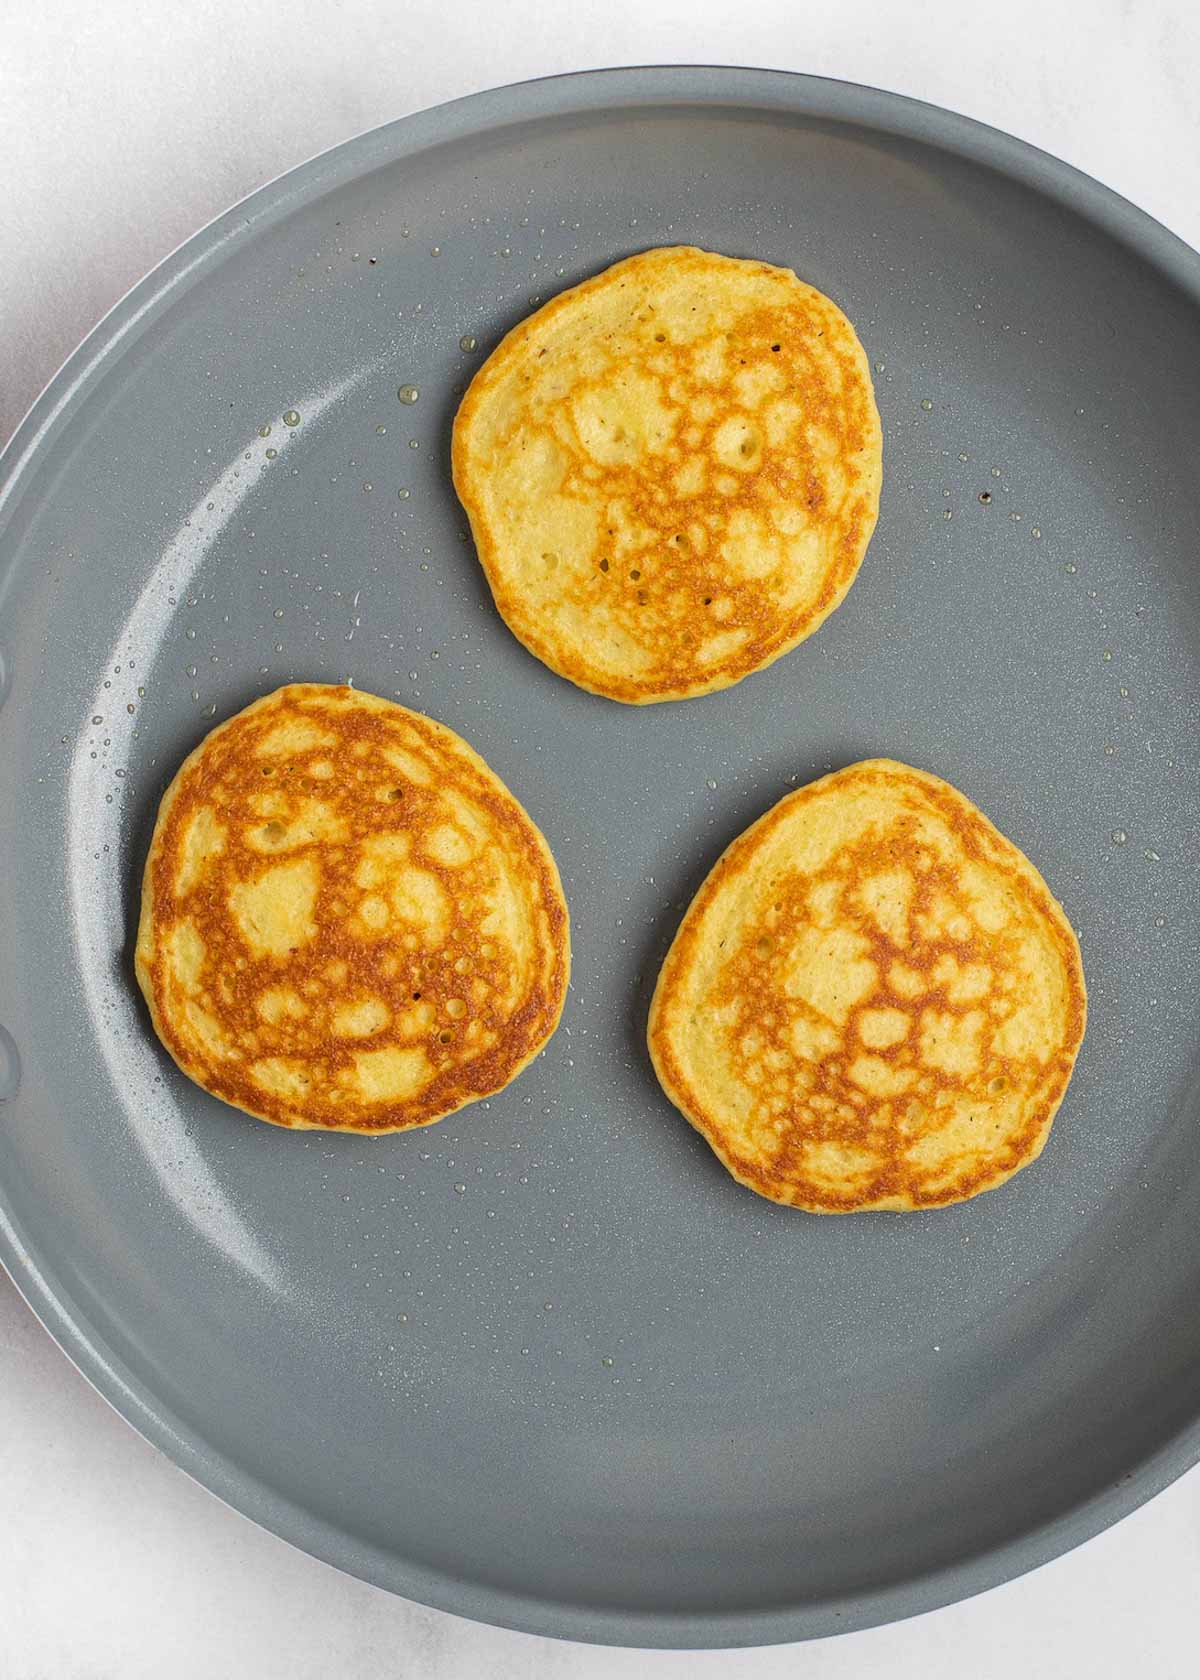 These fluffy Keto Pancakes come out perfect every time! Enjoy three low-carb, gluten-free pancakes for less than 5 net carbs!